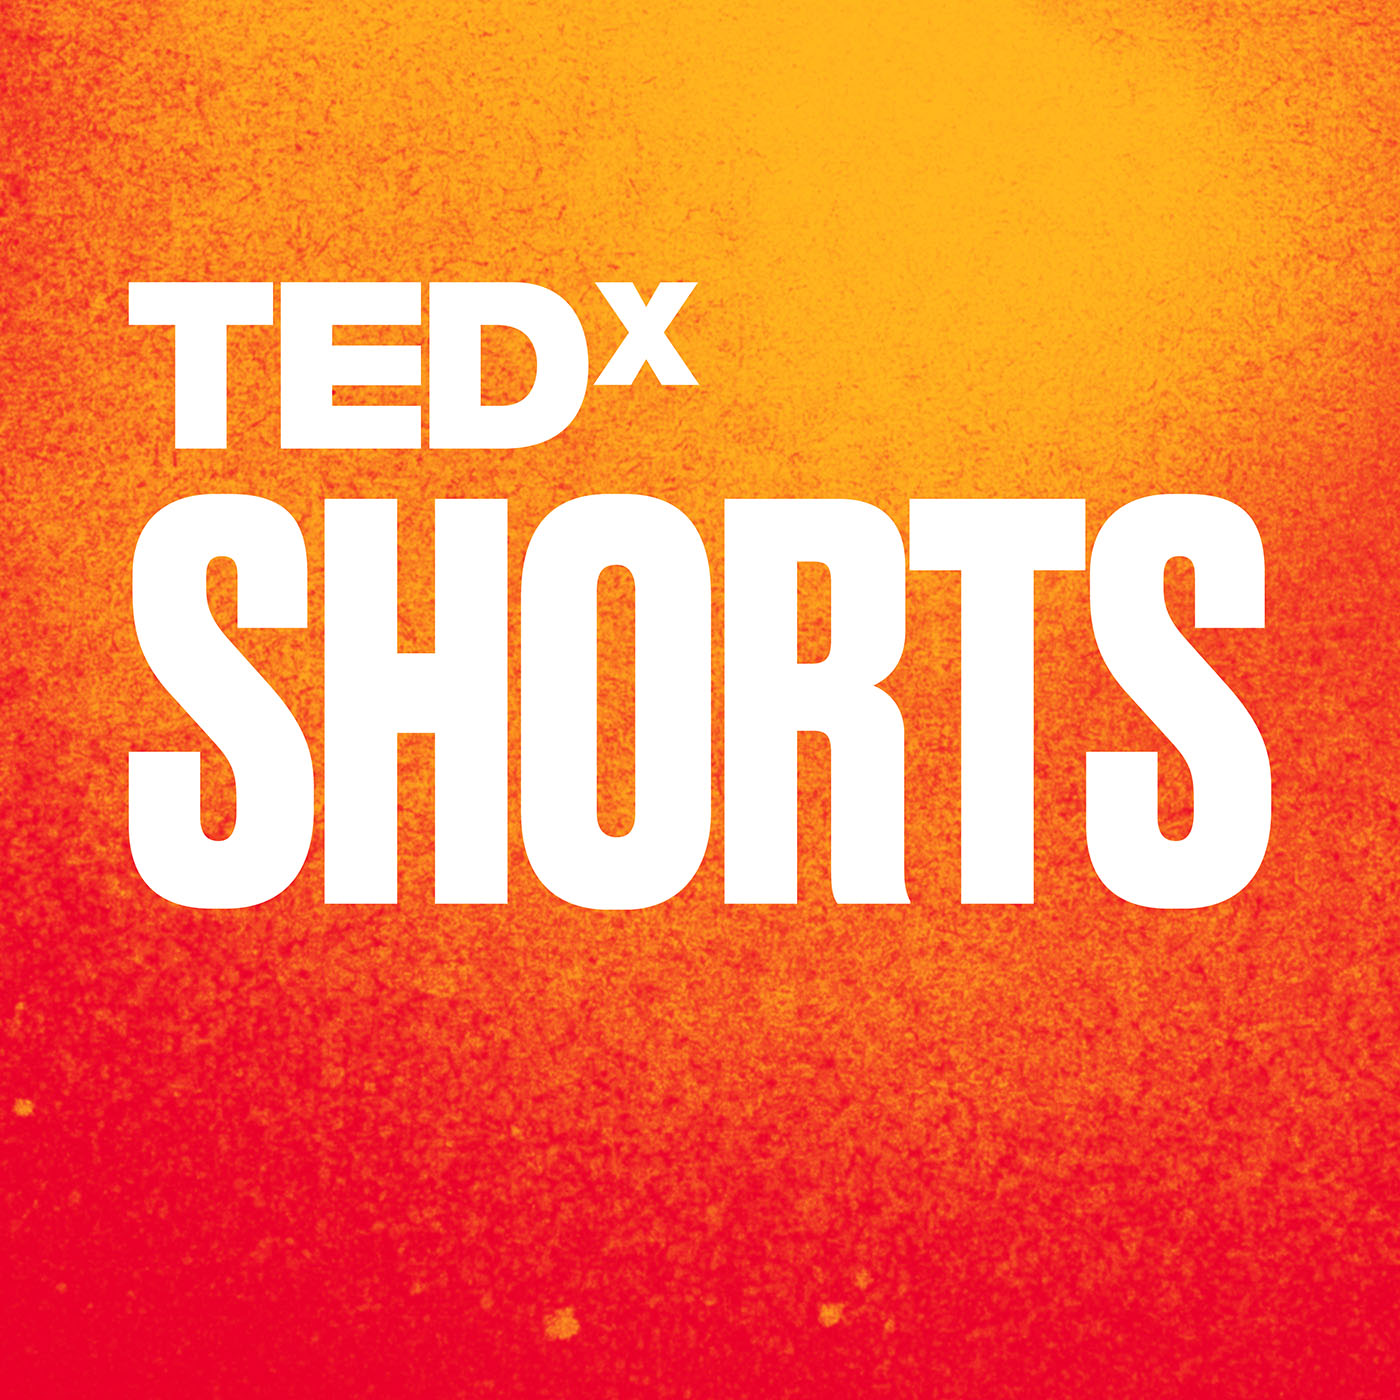 “TEDx SHORTS”, a TED original podcast hosted by actress Atossa
Leoni, premieres May 18